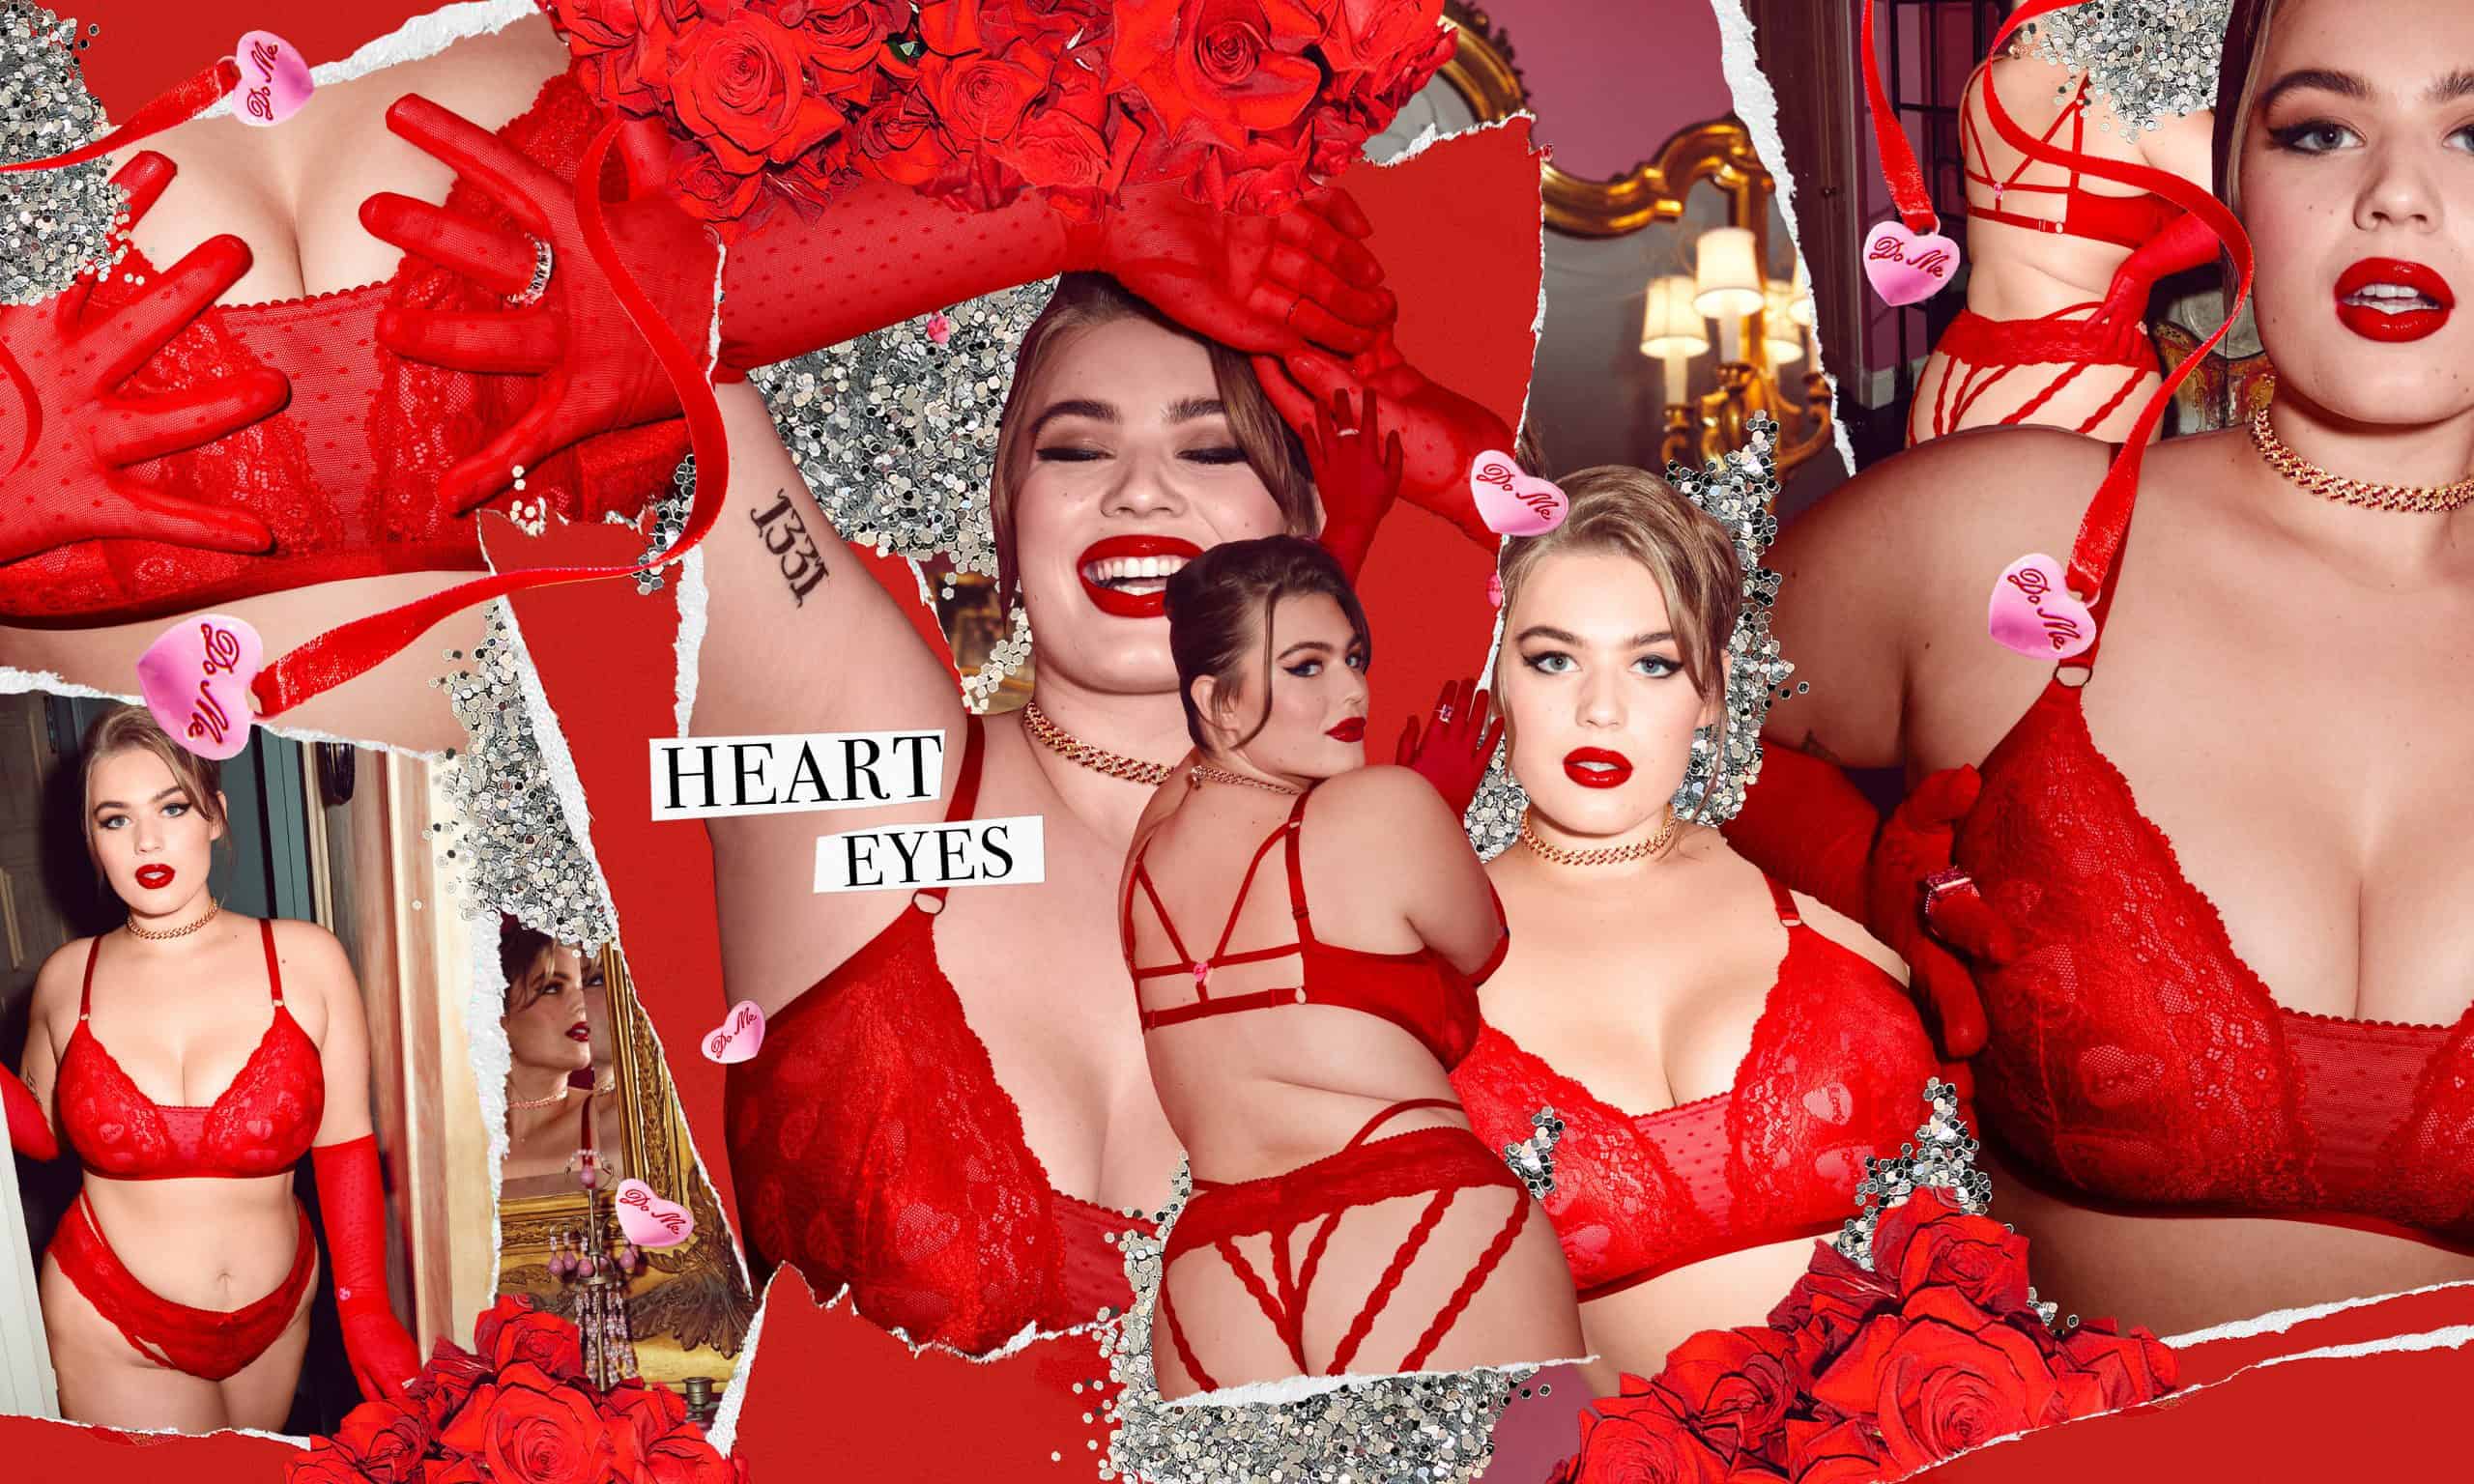 Rihanna oozes sex appeal in new daring lingerie campaign shoot for upcoming  Valentine's Day collection